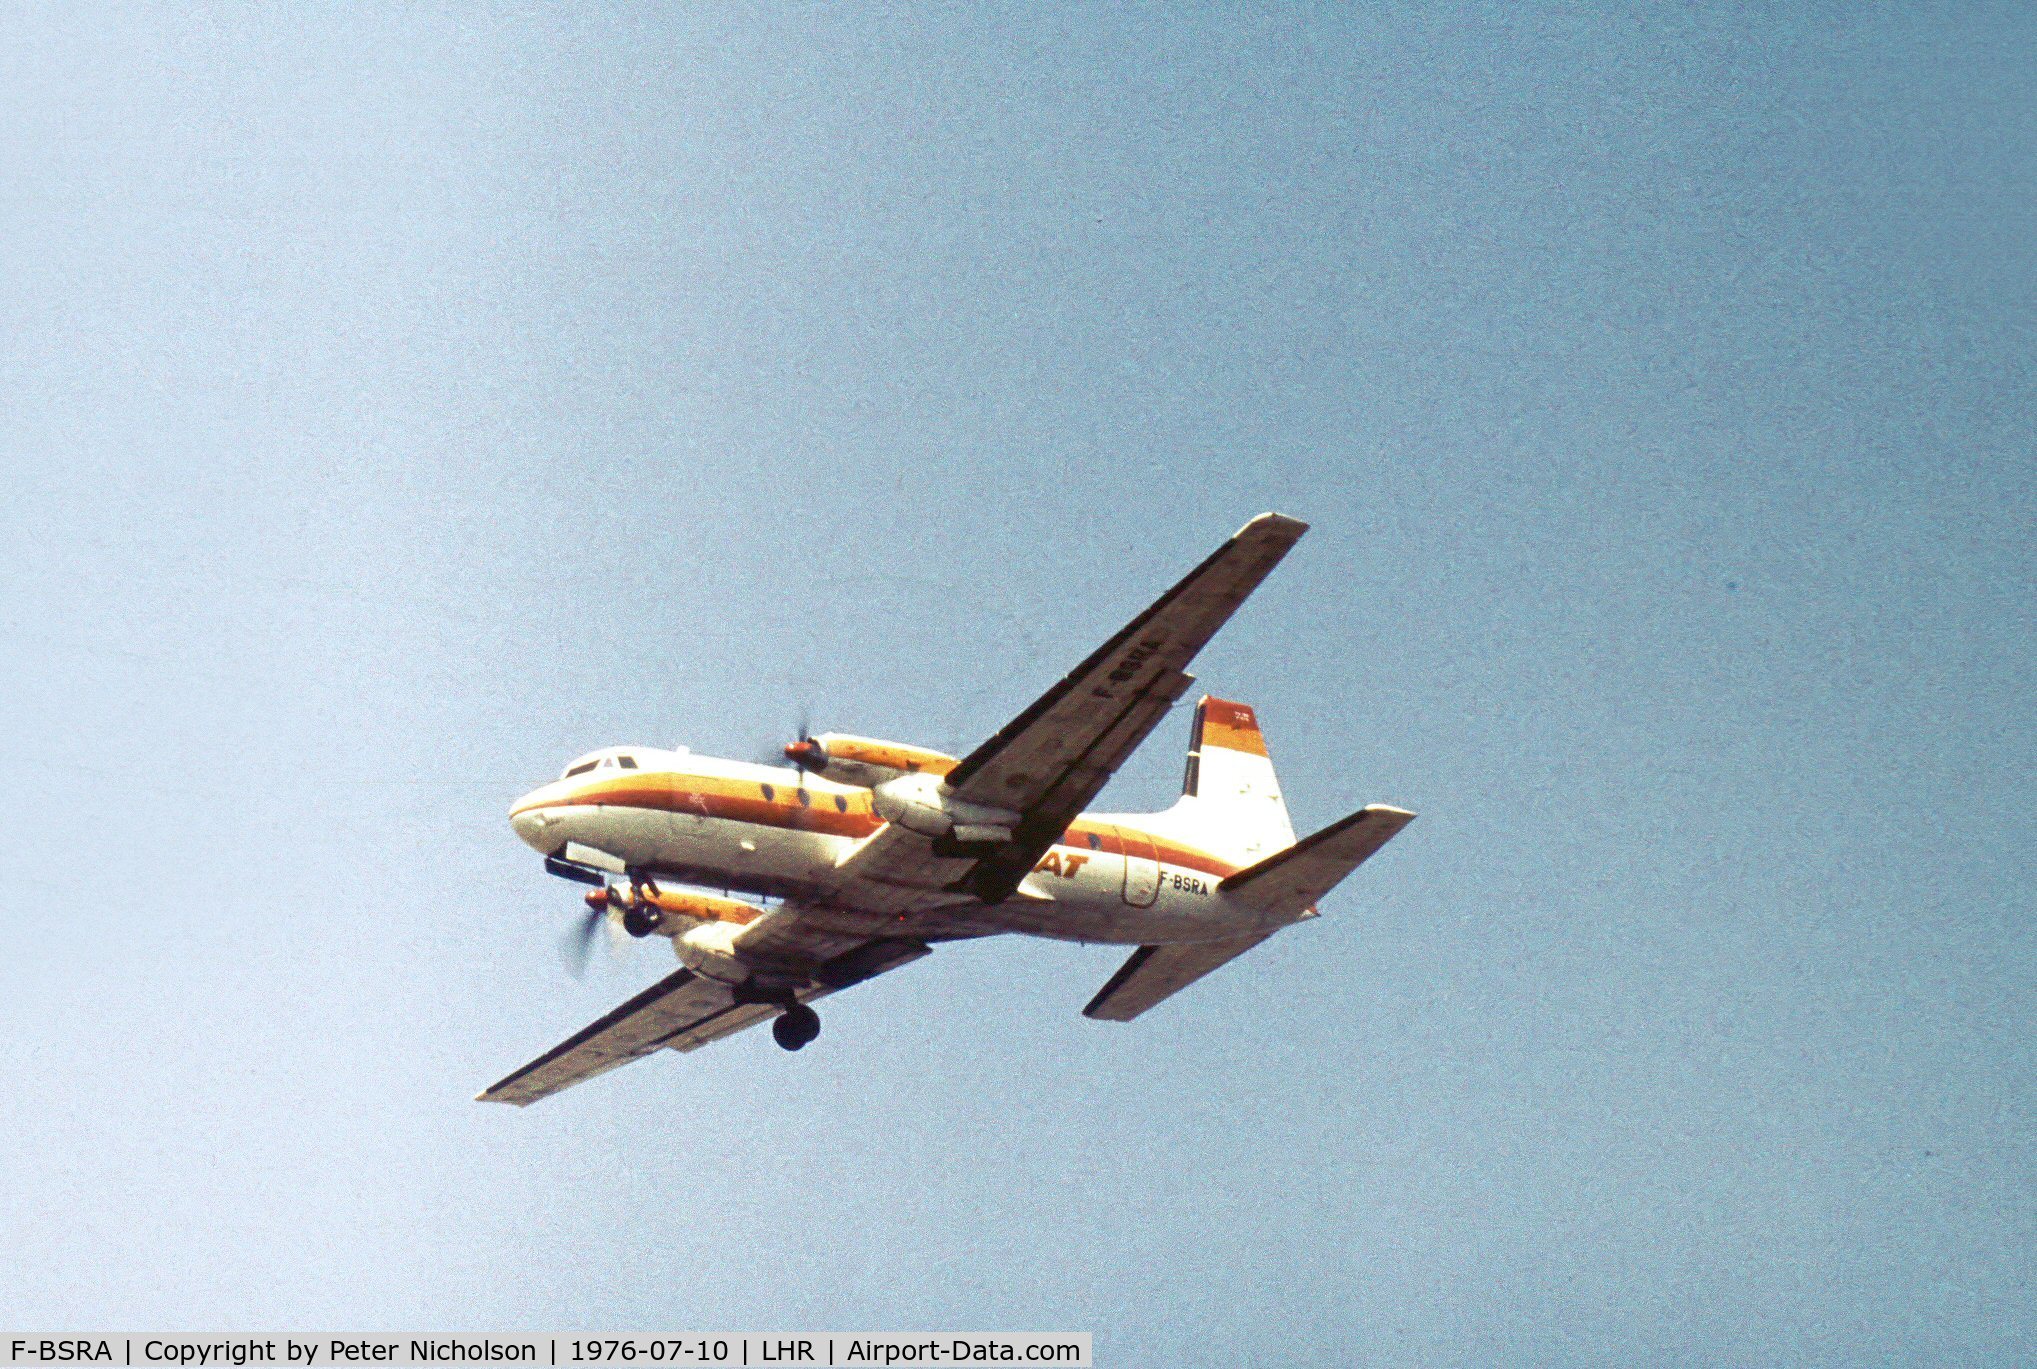 F-BSRA, 1970 Hawker Siddeley HS.748 Series 2A C/N 1678, HS.748 of Touraine Air Transport on final approach to London Heathrow in the Summer of 1976.